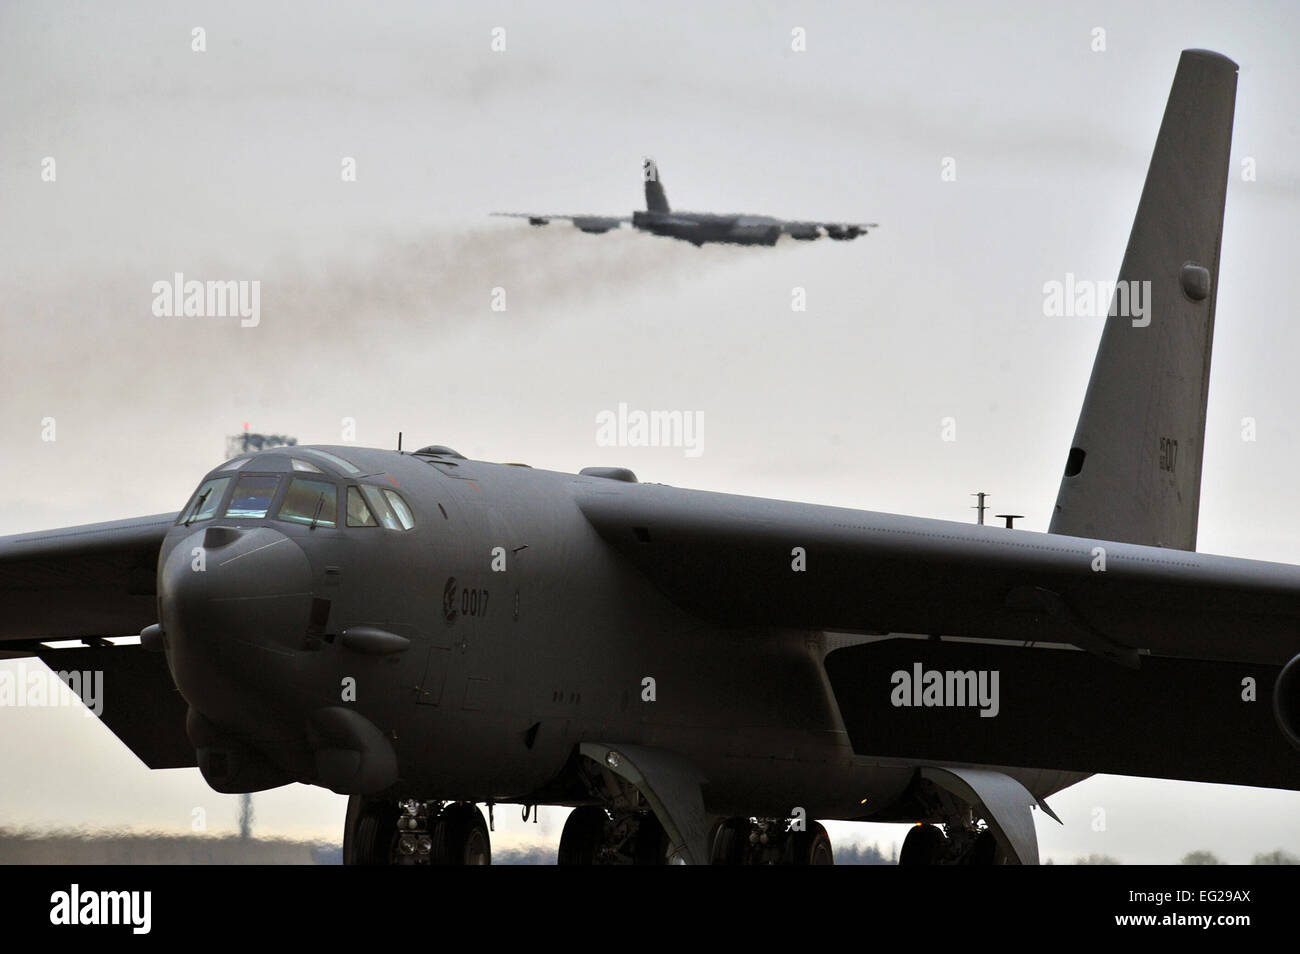 A B-52H Stratofortress takes off as another B-52H taxis onto the runway during a training exercise May 21, 2013, at Minot Air Force Base, N.D.  Senior Airman Brittany Y. Auld Stock Photo